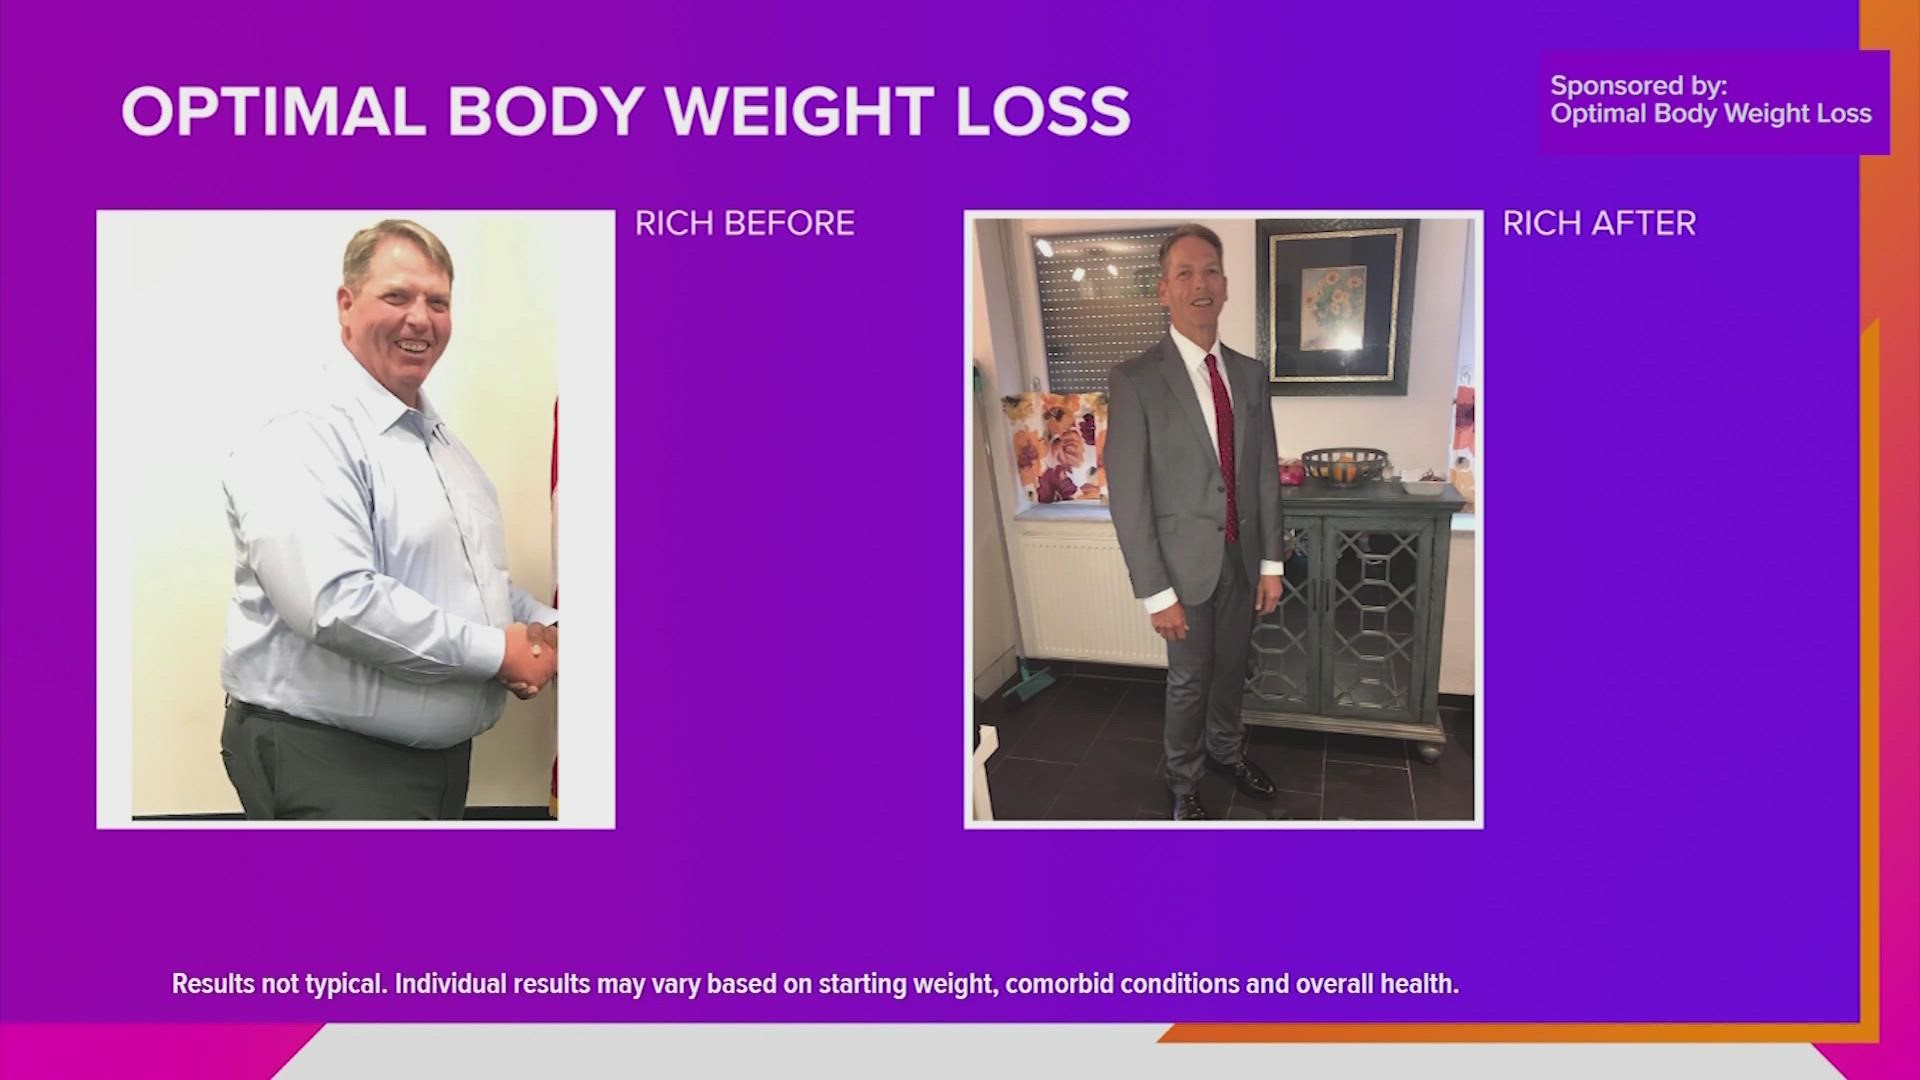 Dr. Cory Aplin shares how he can help you lose weight without losing your sanity